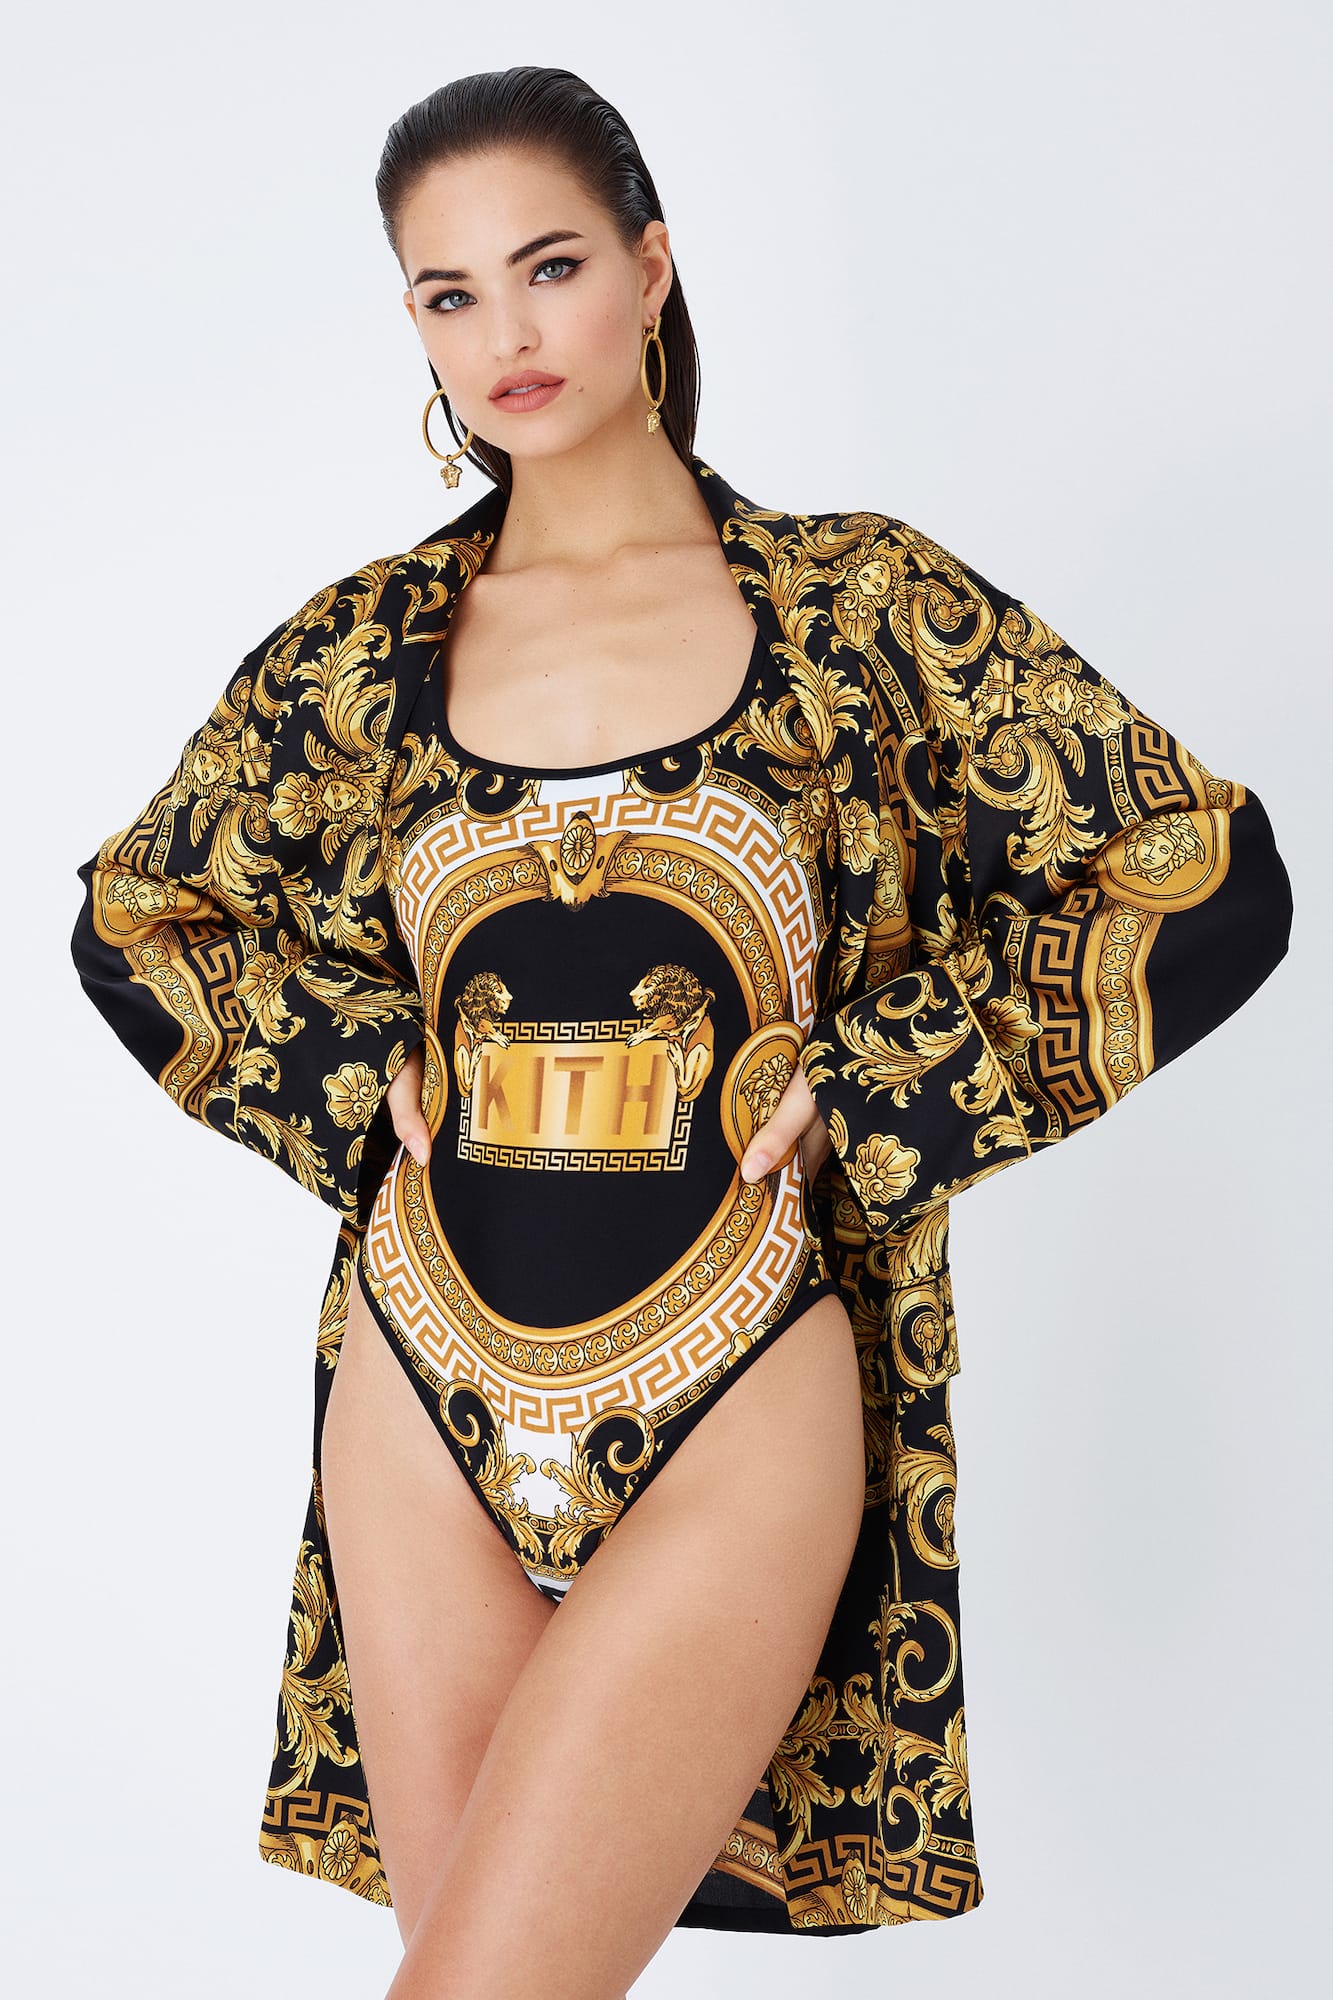 what's the difference between versace and versace collection